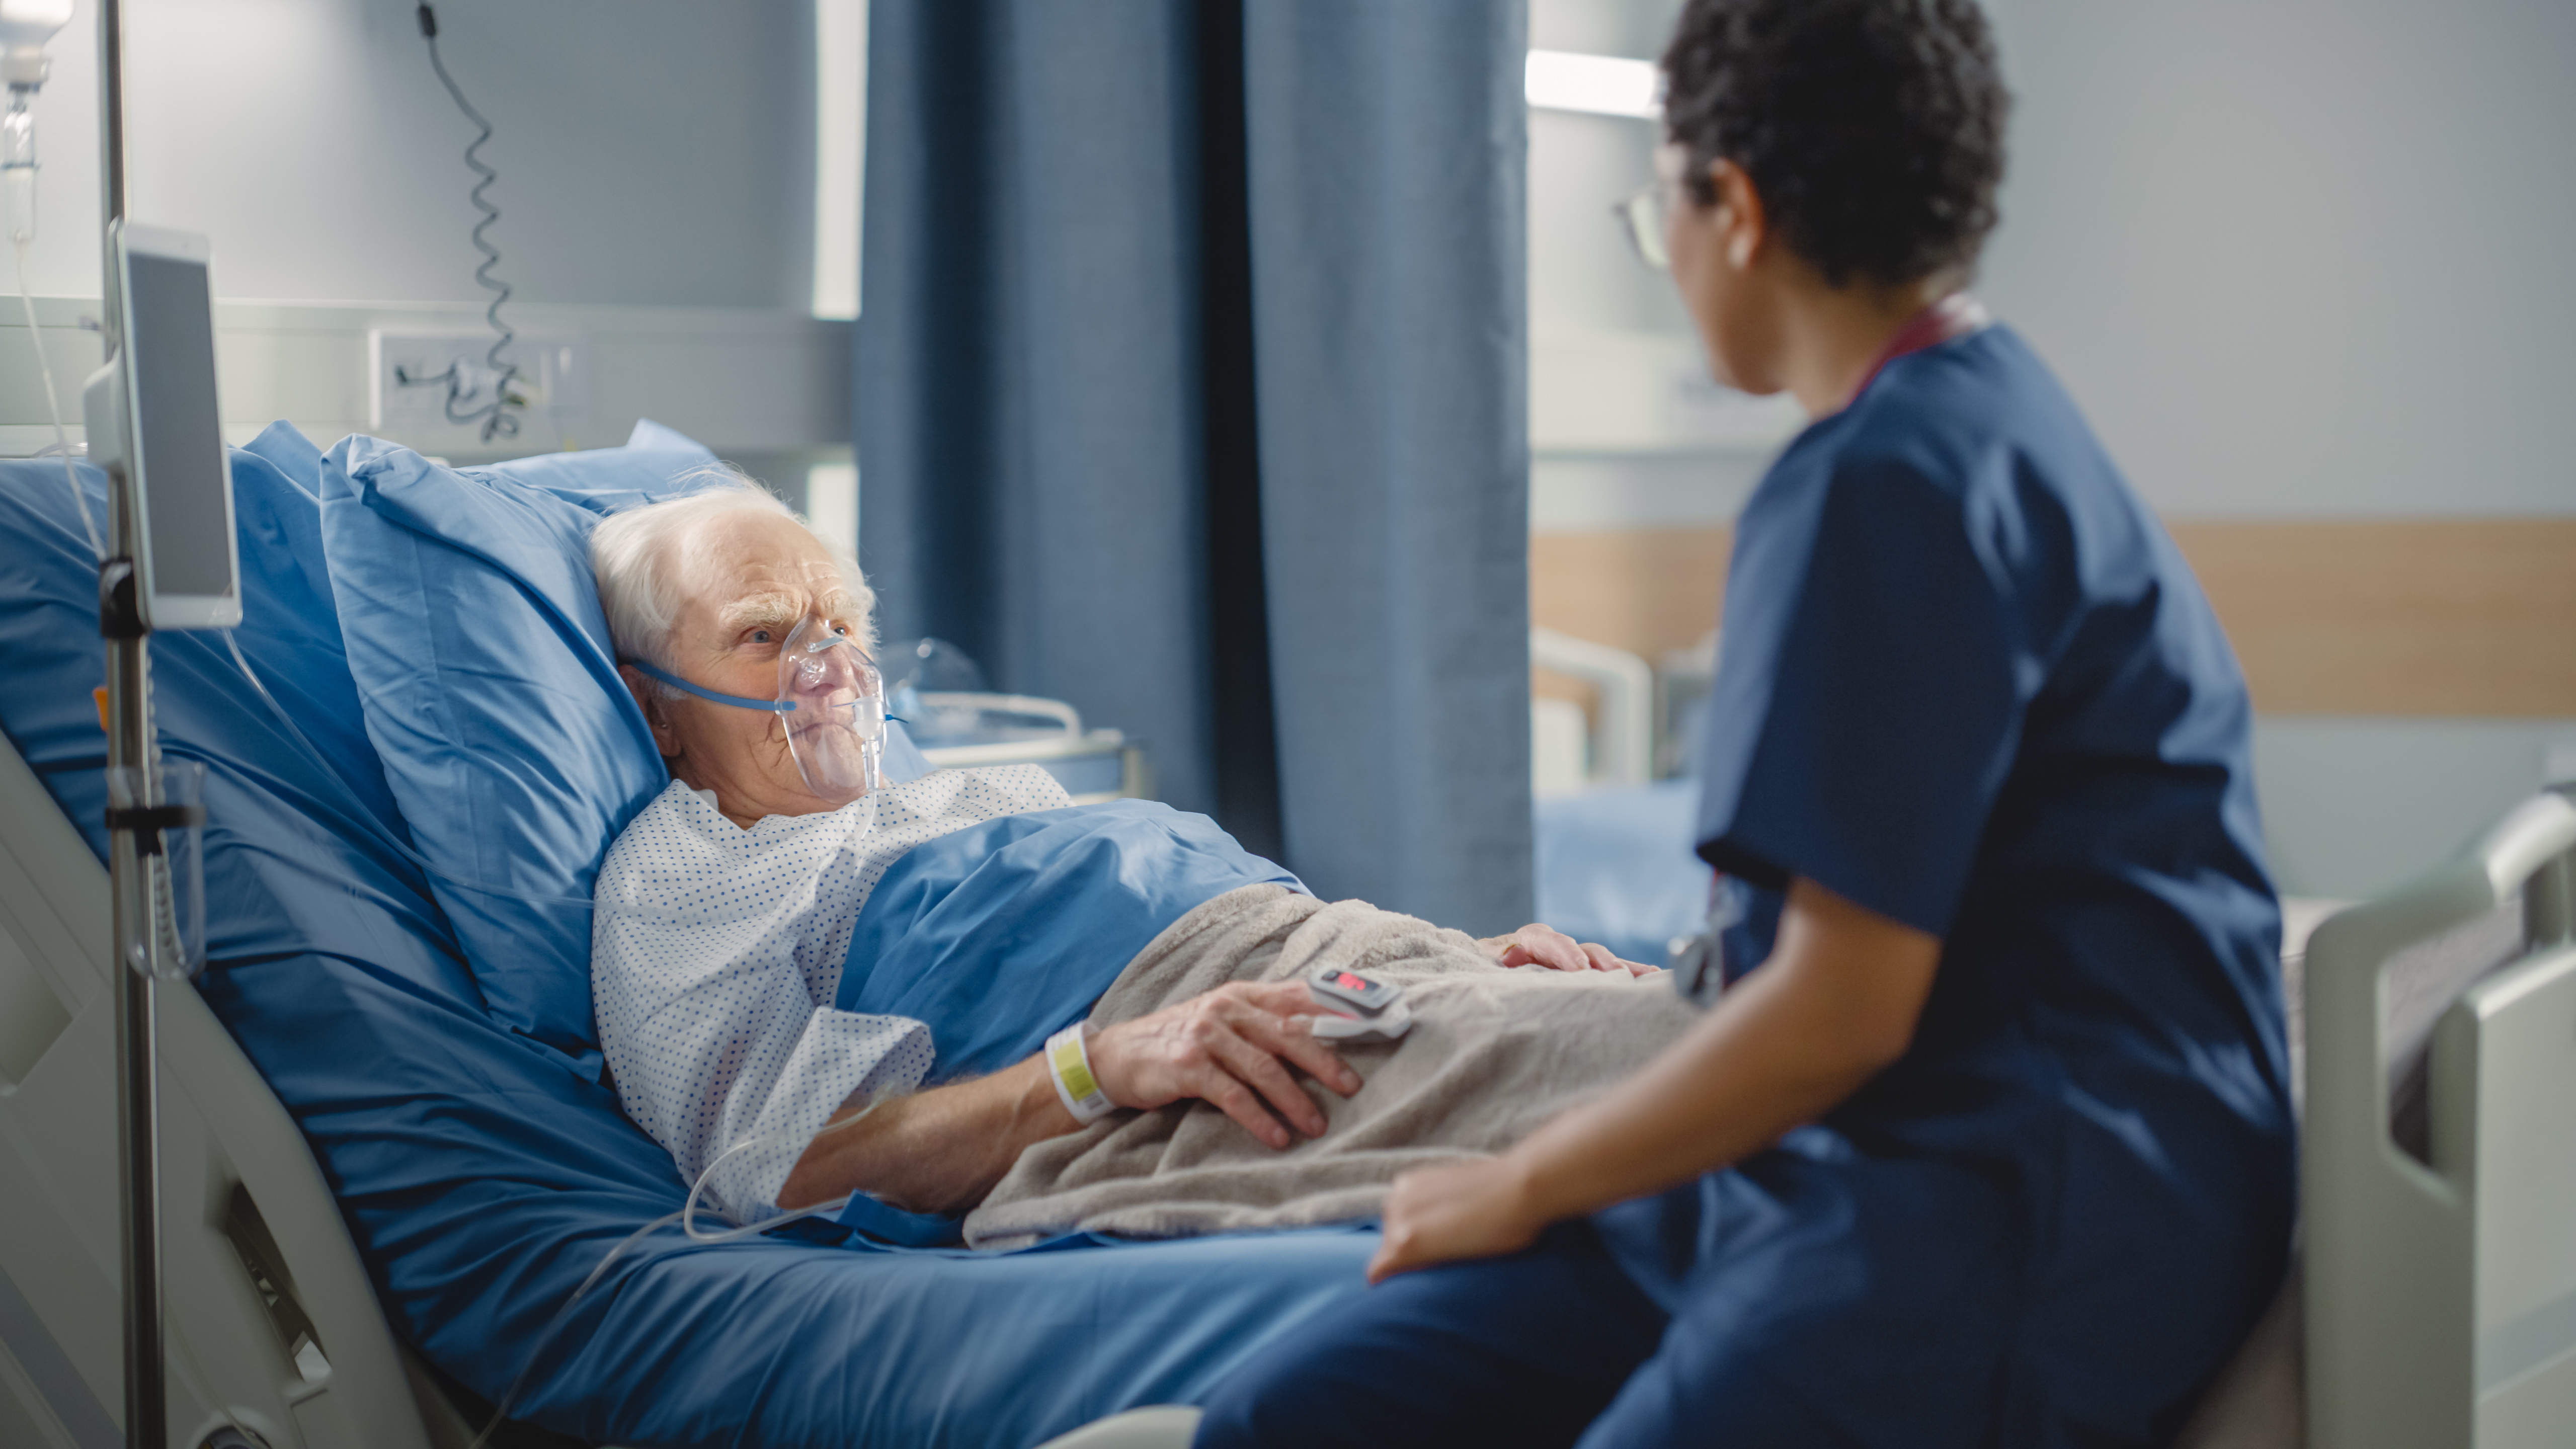 Friendly Head Nurse Connects Finger Heart Rate Monitor or Pulse Oximeter to Elderly Patient Wearing Oxygen Mask Resting in Bed.